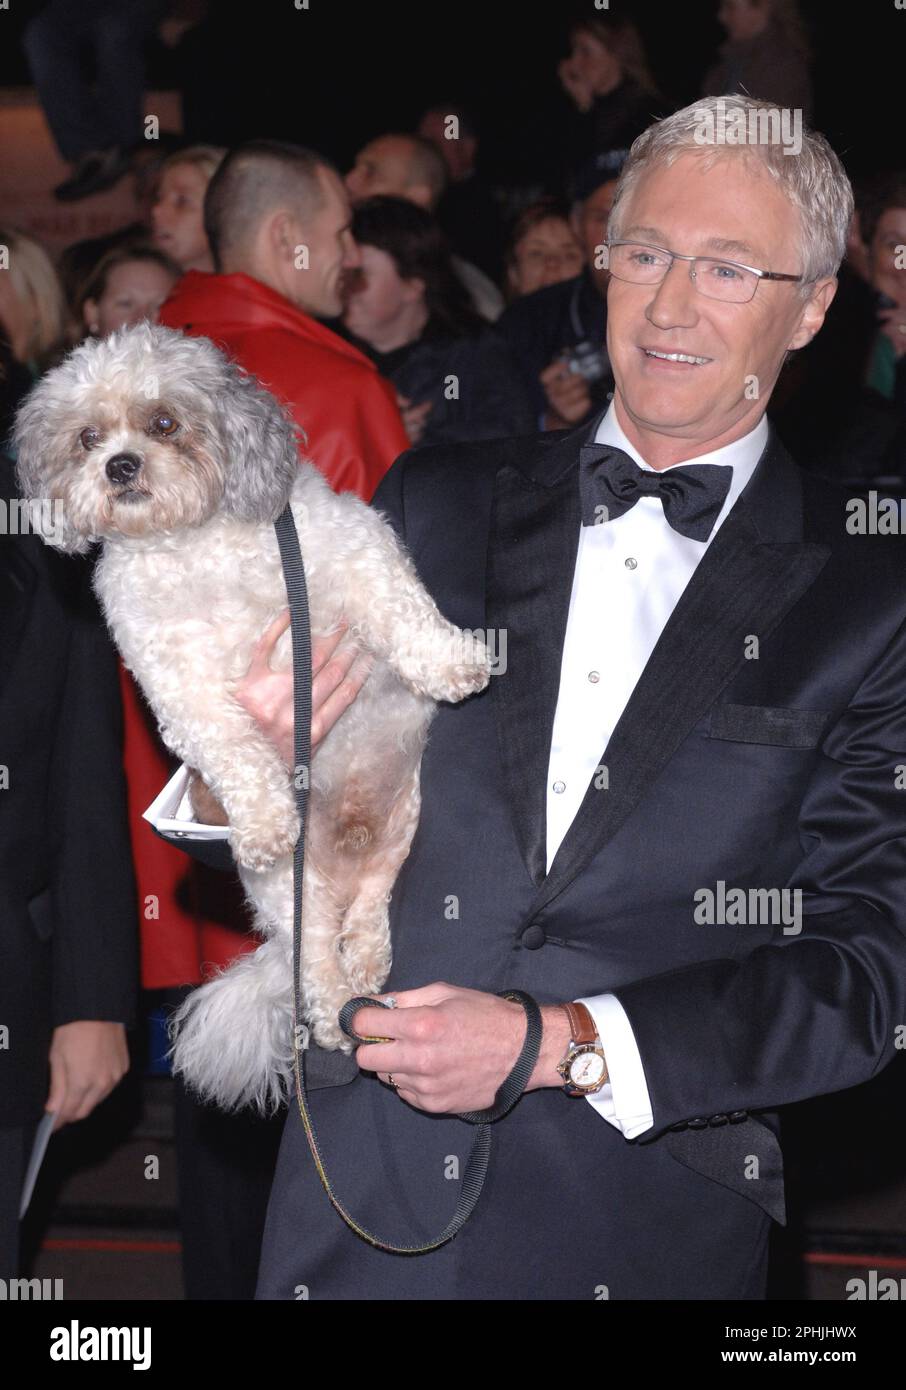 File photo dated 25/10/05 of Paul O'Grady and his dog Buster arriving for the National Television Awards 2005 (NTA), at the Royal Albert Hall, central London. TV presenter and comedian Paul O'Grady has died at the age of 67, his partner Andre Portasio has said. The TV star, also known for his drag queen persona Lily Savage, died 'unexpectedly but peacefully' on Tuesday evening, a statement shared with the PA news agency via a representative said. Issue date: Wednesday March 29, 2023. Stock Photo